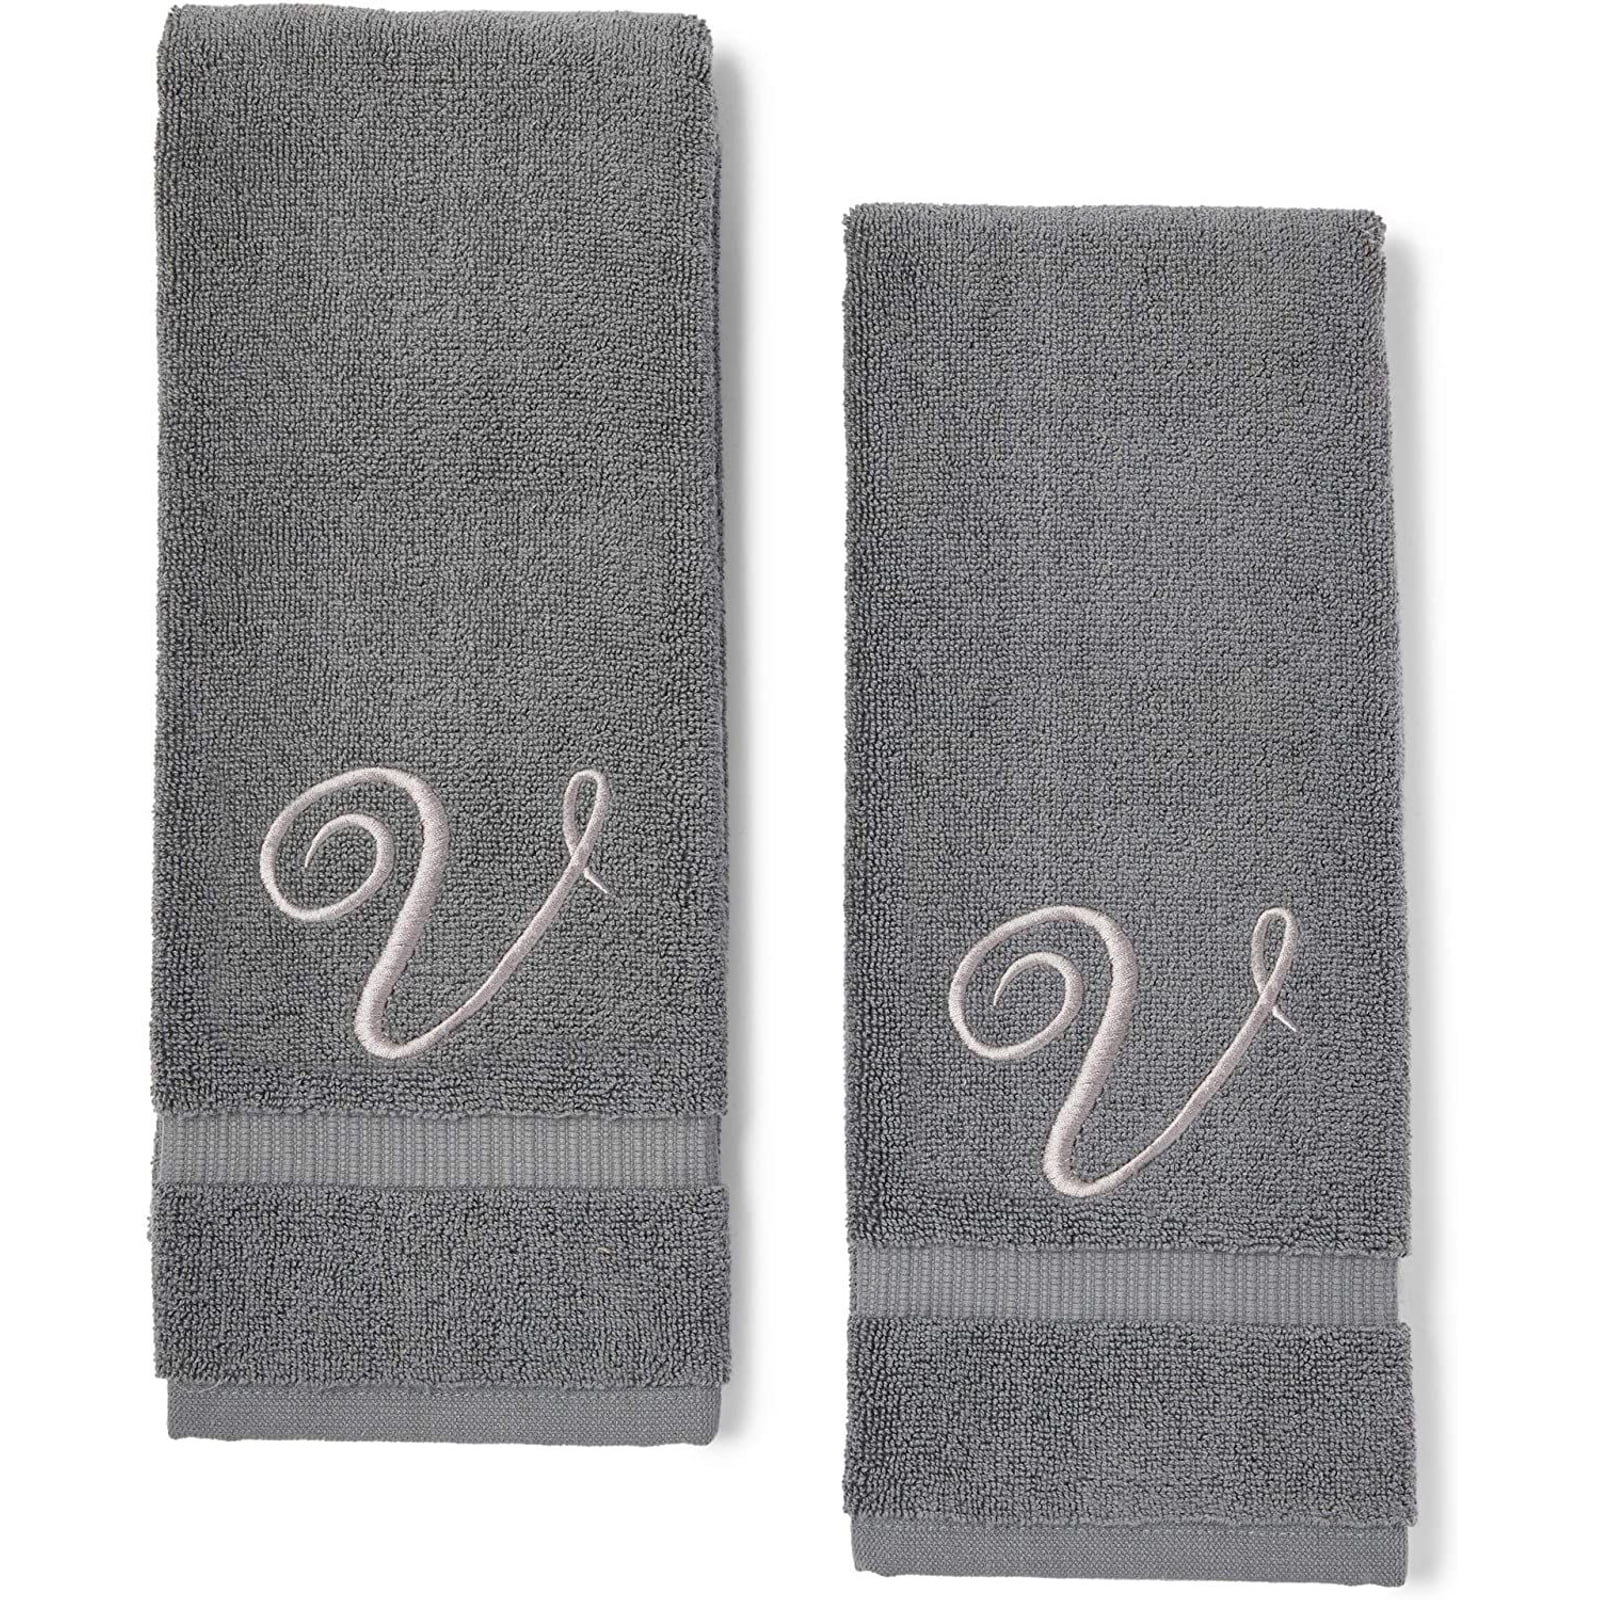 11 x 18 Inches Monogrammed Gifts Set of 4- Decorative Fingertip Towels 